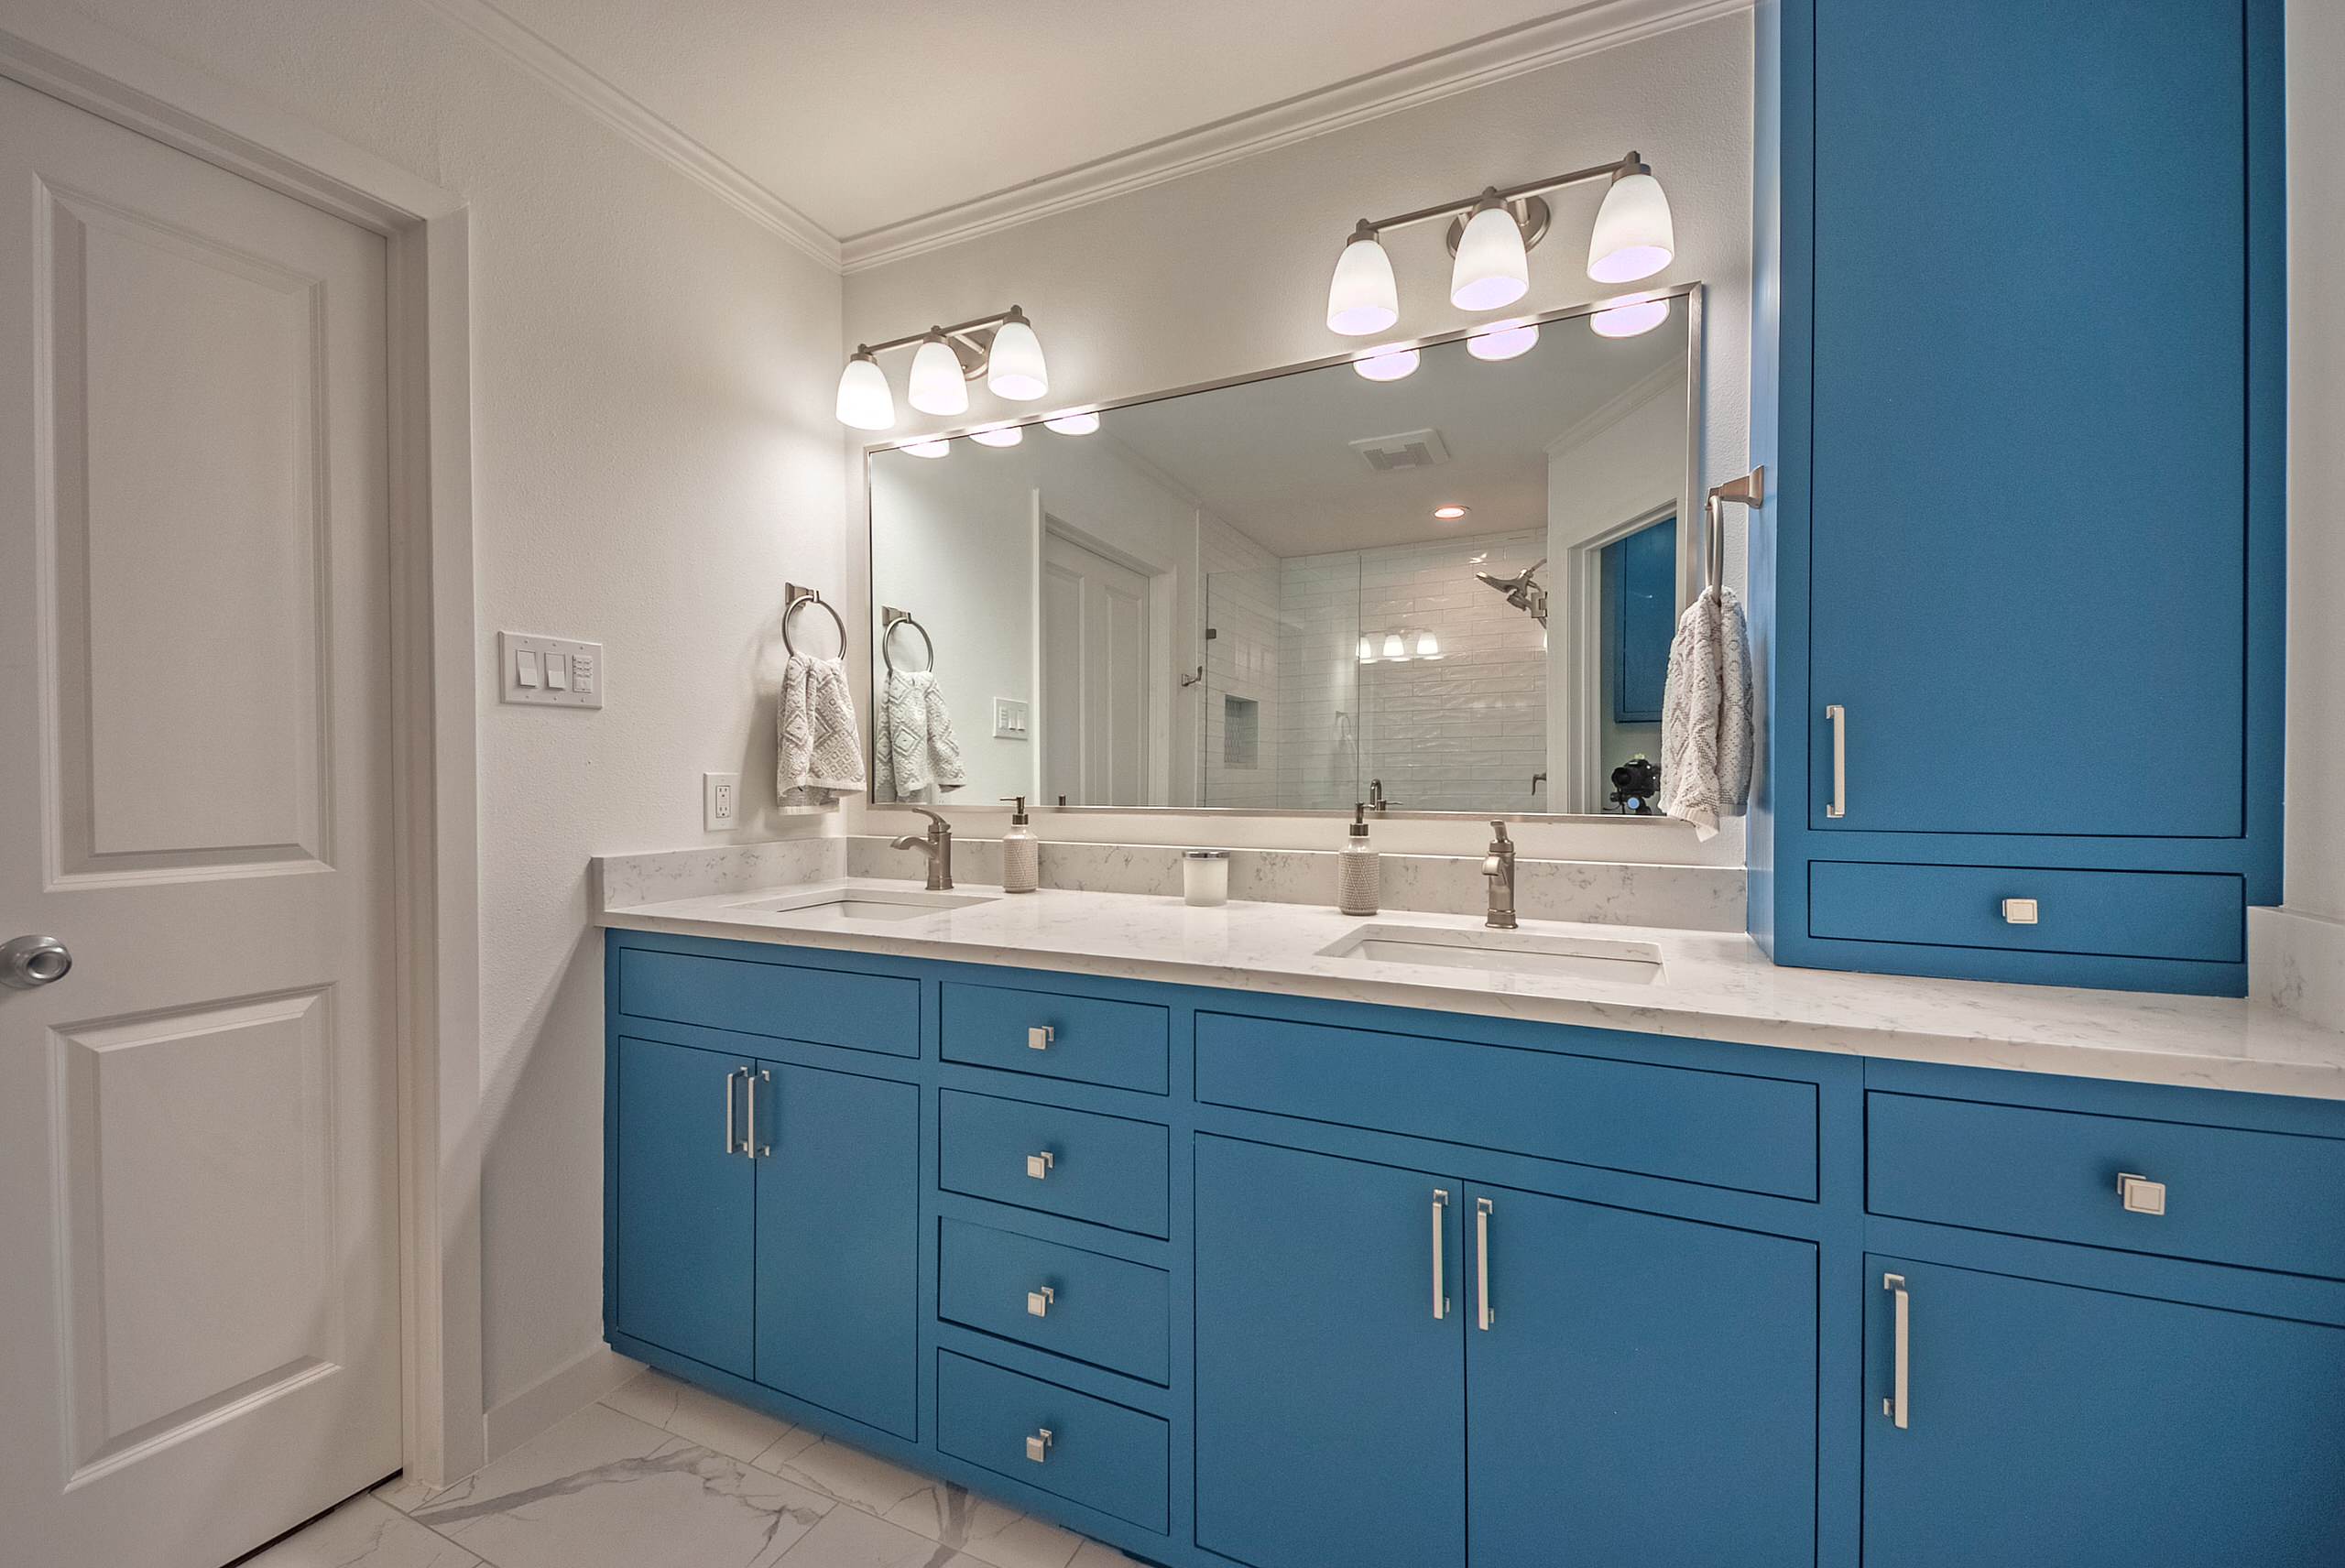 Bathroom and Kitchen Remodeling Service in Dallas | O'Brien Group Inc